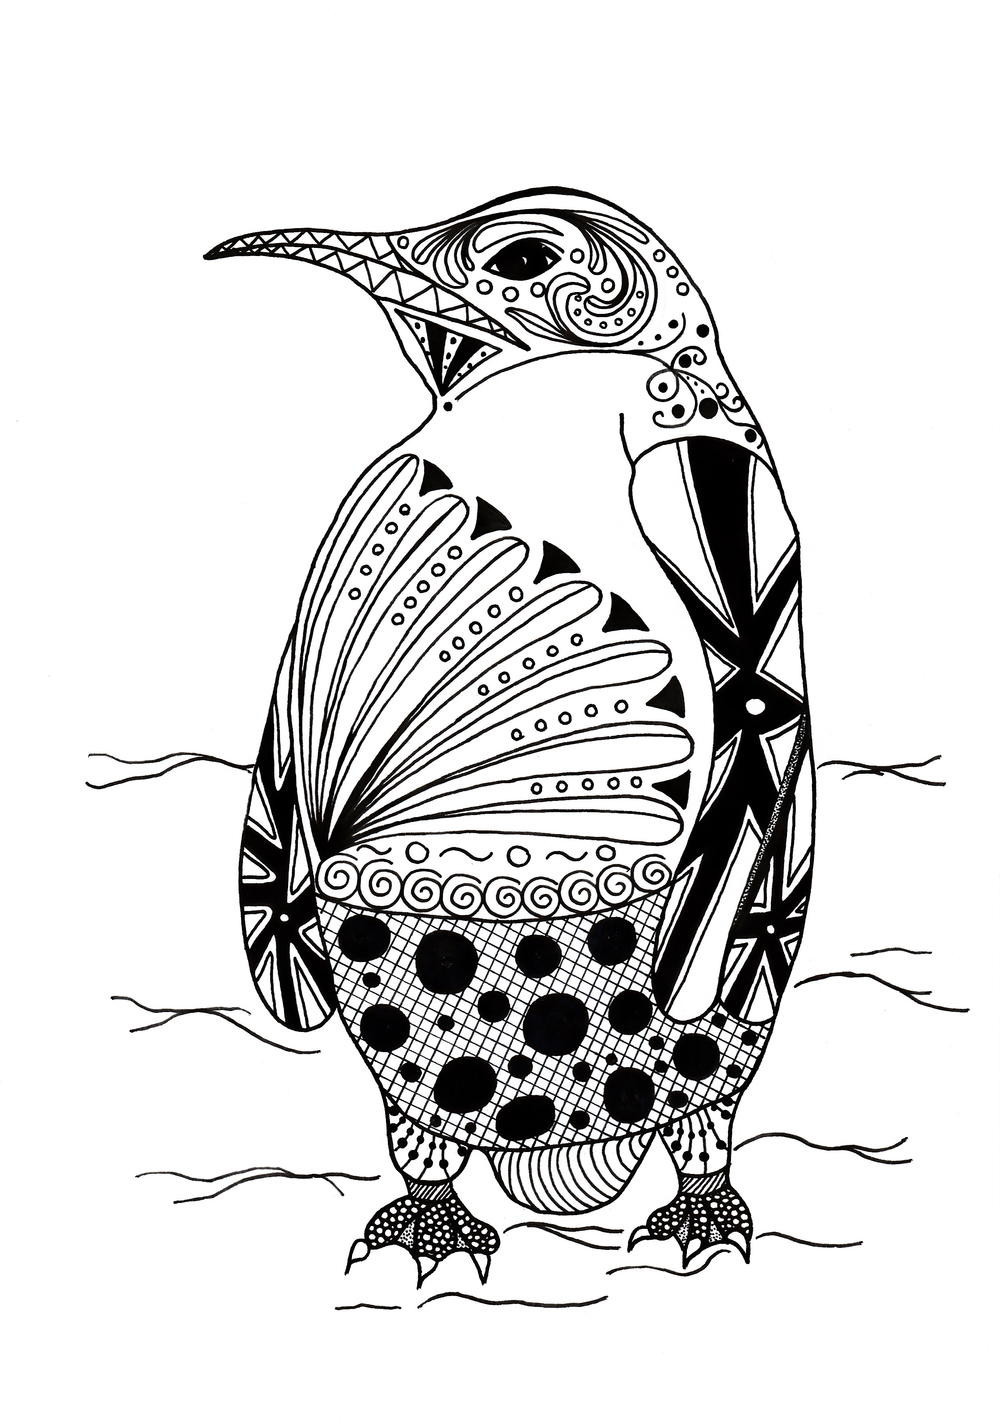 Large Print Coloring Pages For Adults
 Intricate Penguin Adult Coloring Page